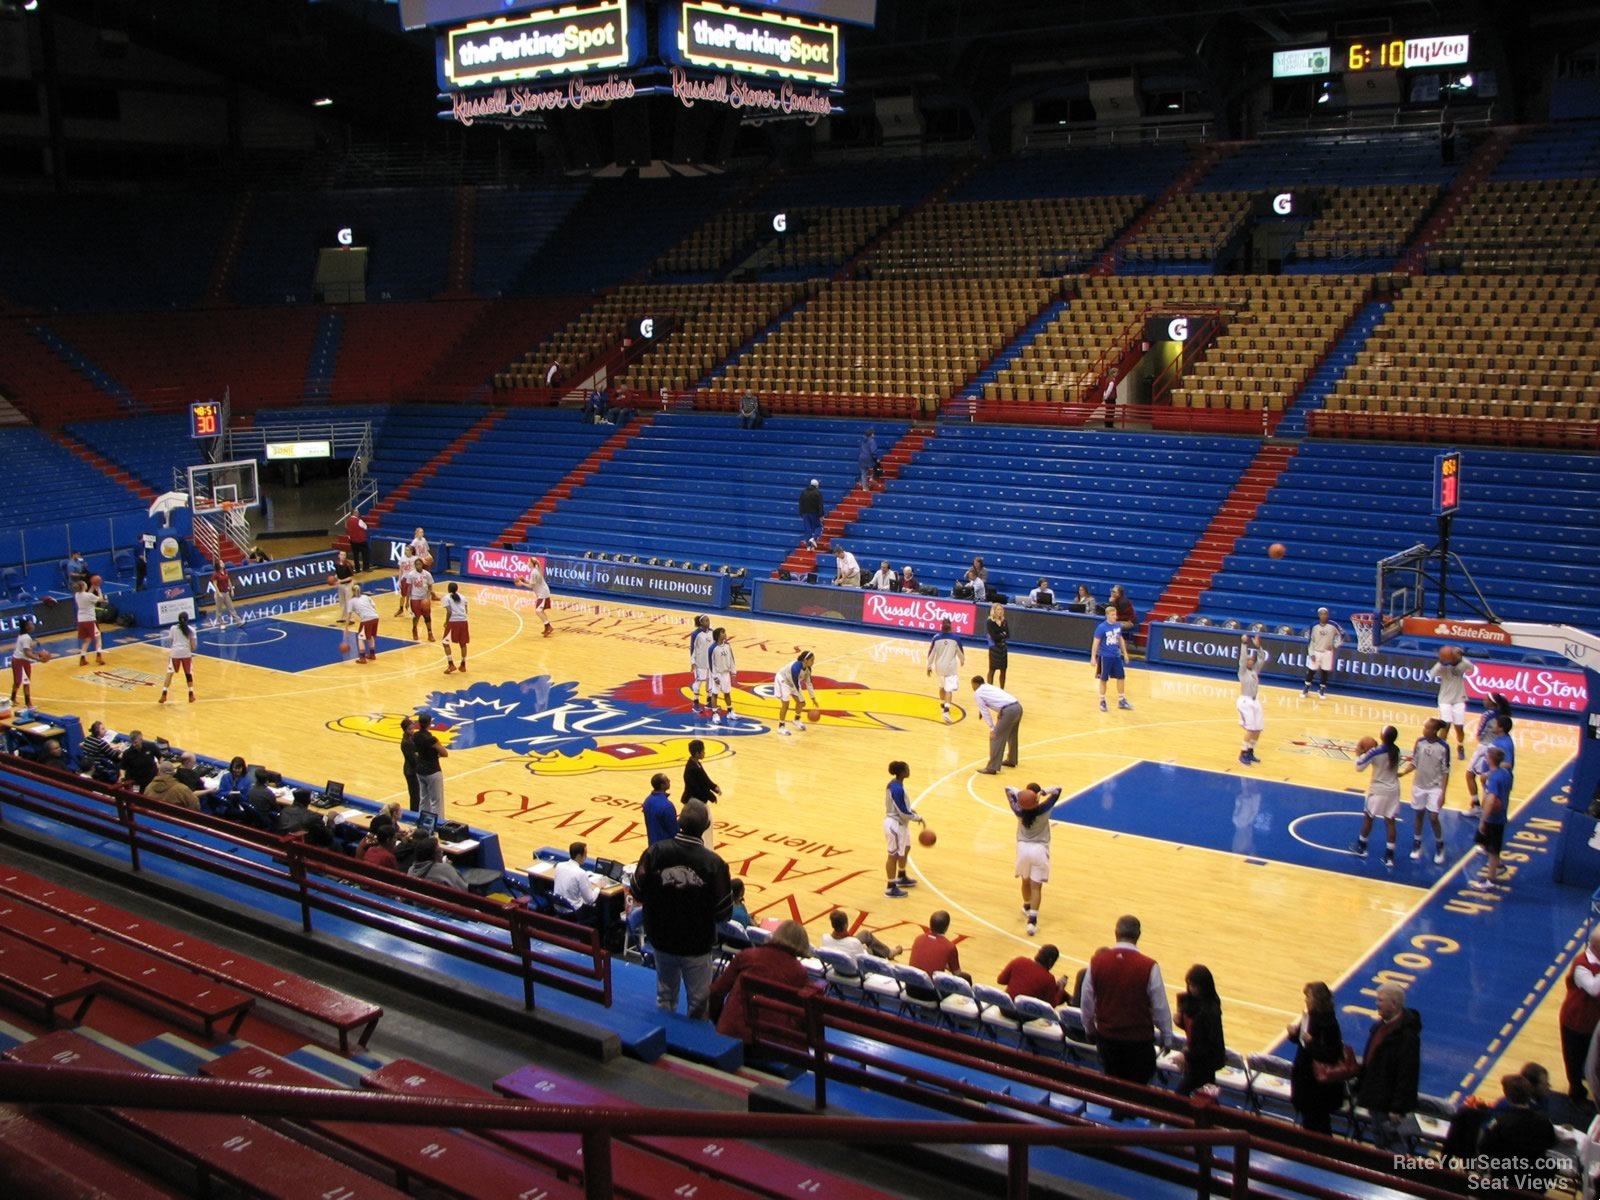 section 16, row 8 seat view  - allen fieldhouse